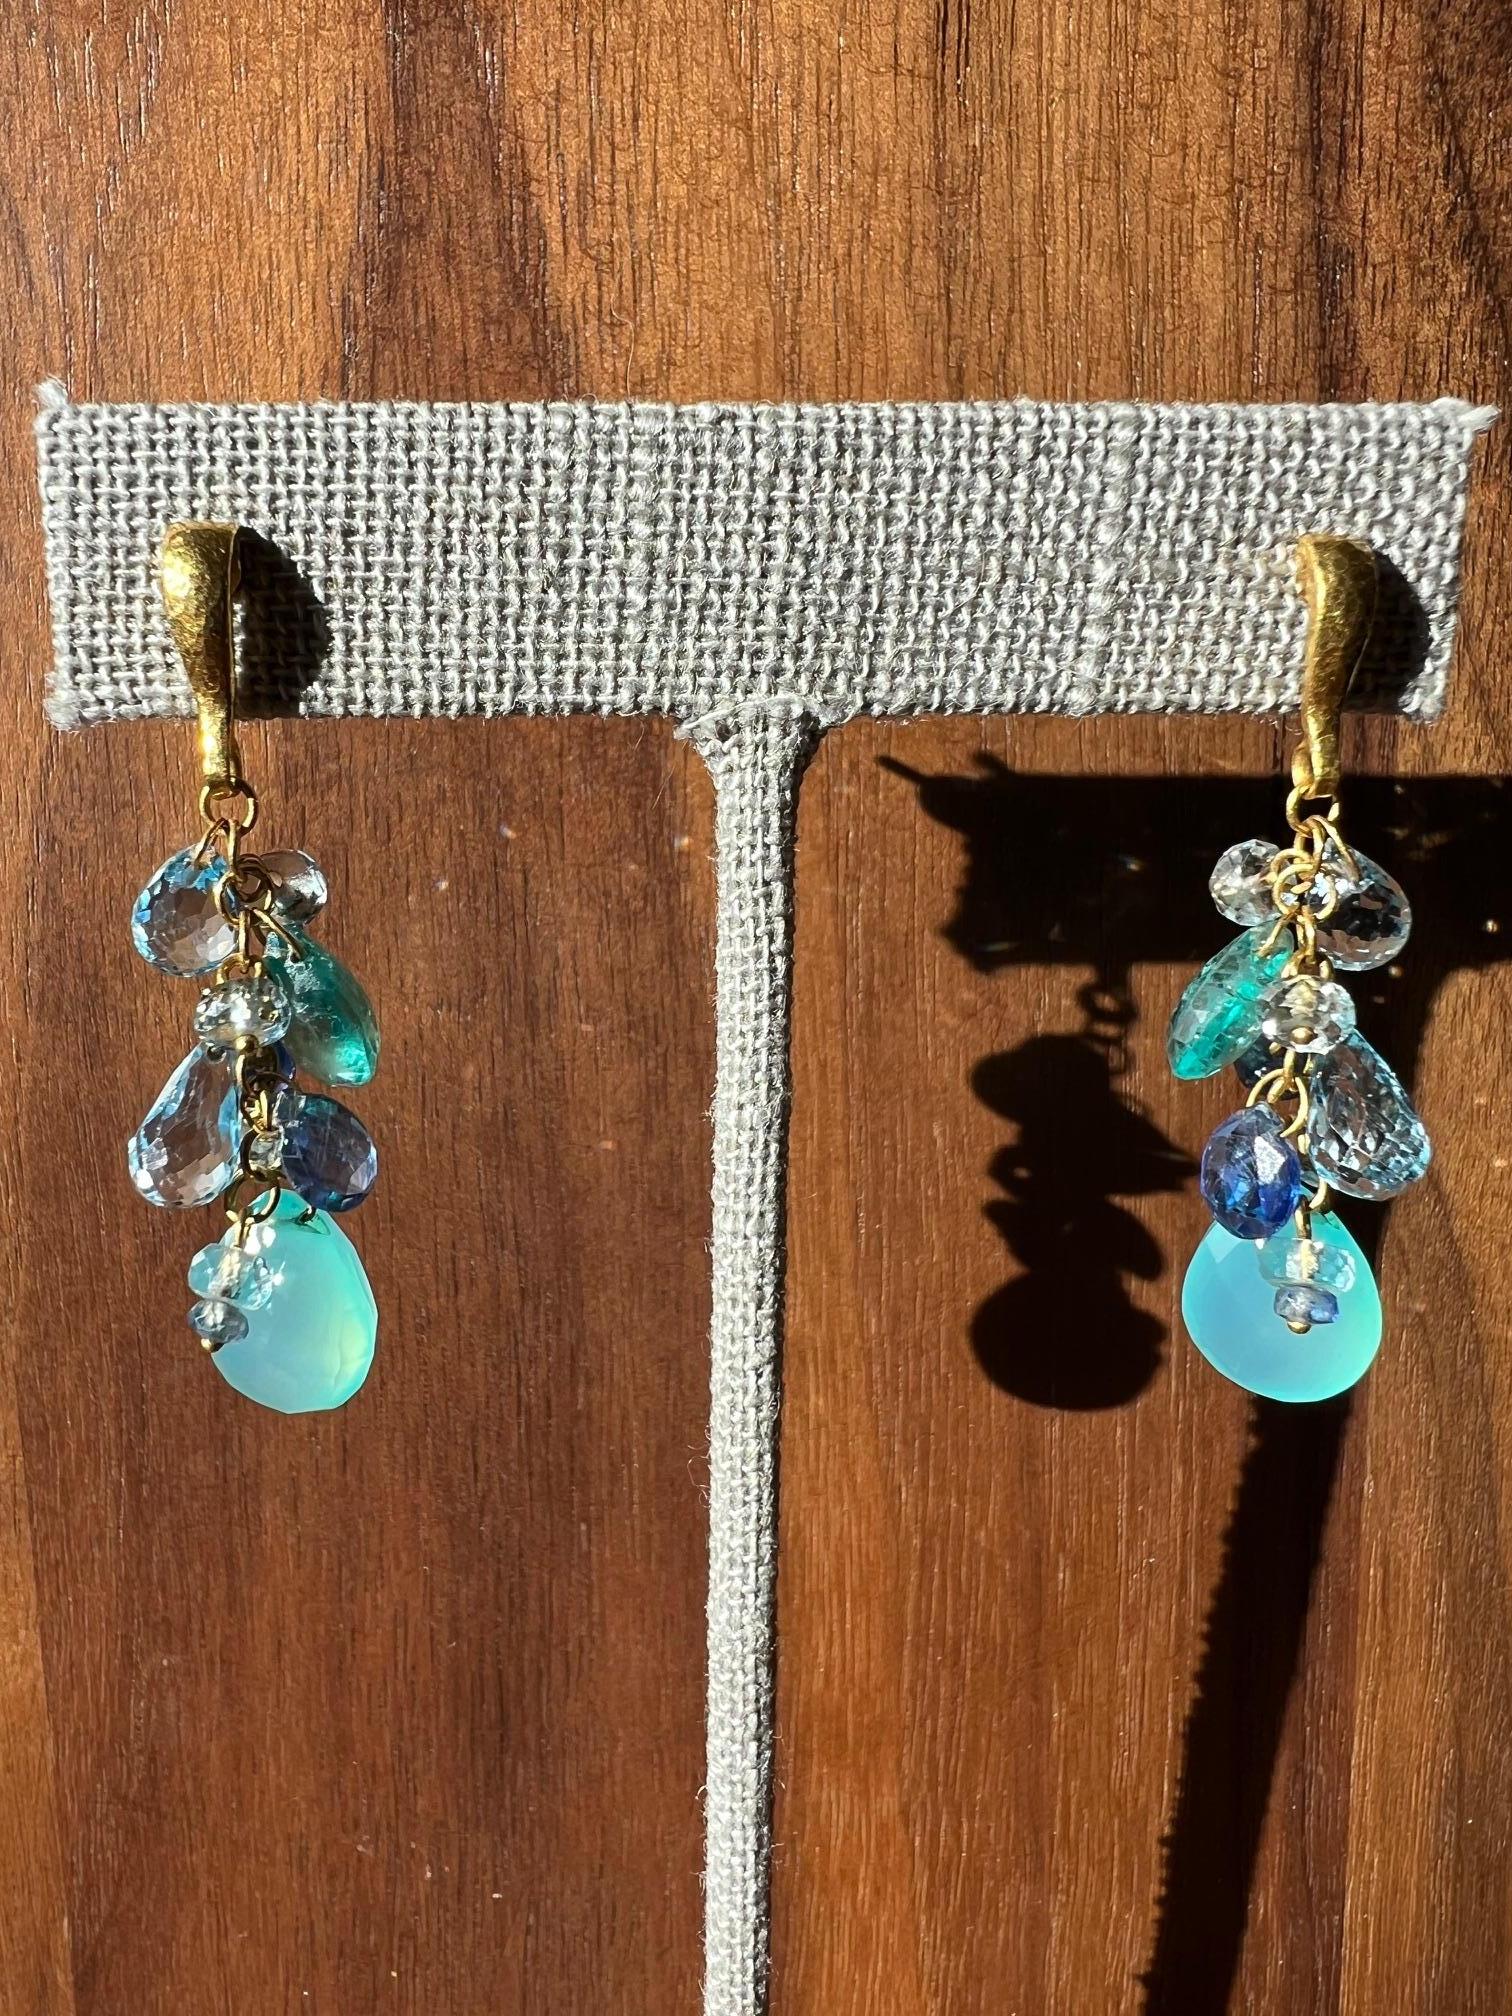 Elevate your jewelry collection with these stunning Gurhan dangle earrings. Crafted from 24-karat yellow gold, these earrings feature a beautiful combination of blue sapphire and aquamarine gemstones. The blue hue of the gemstones perfectly